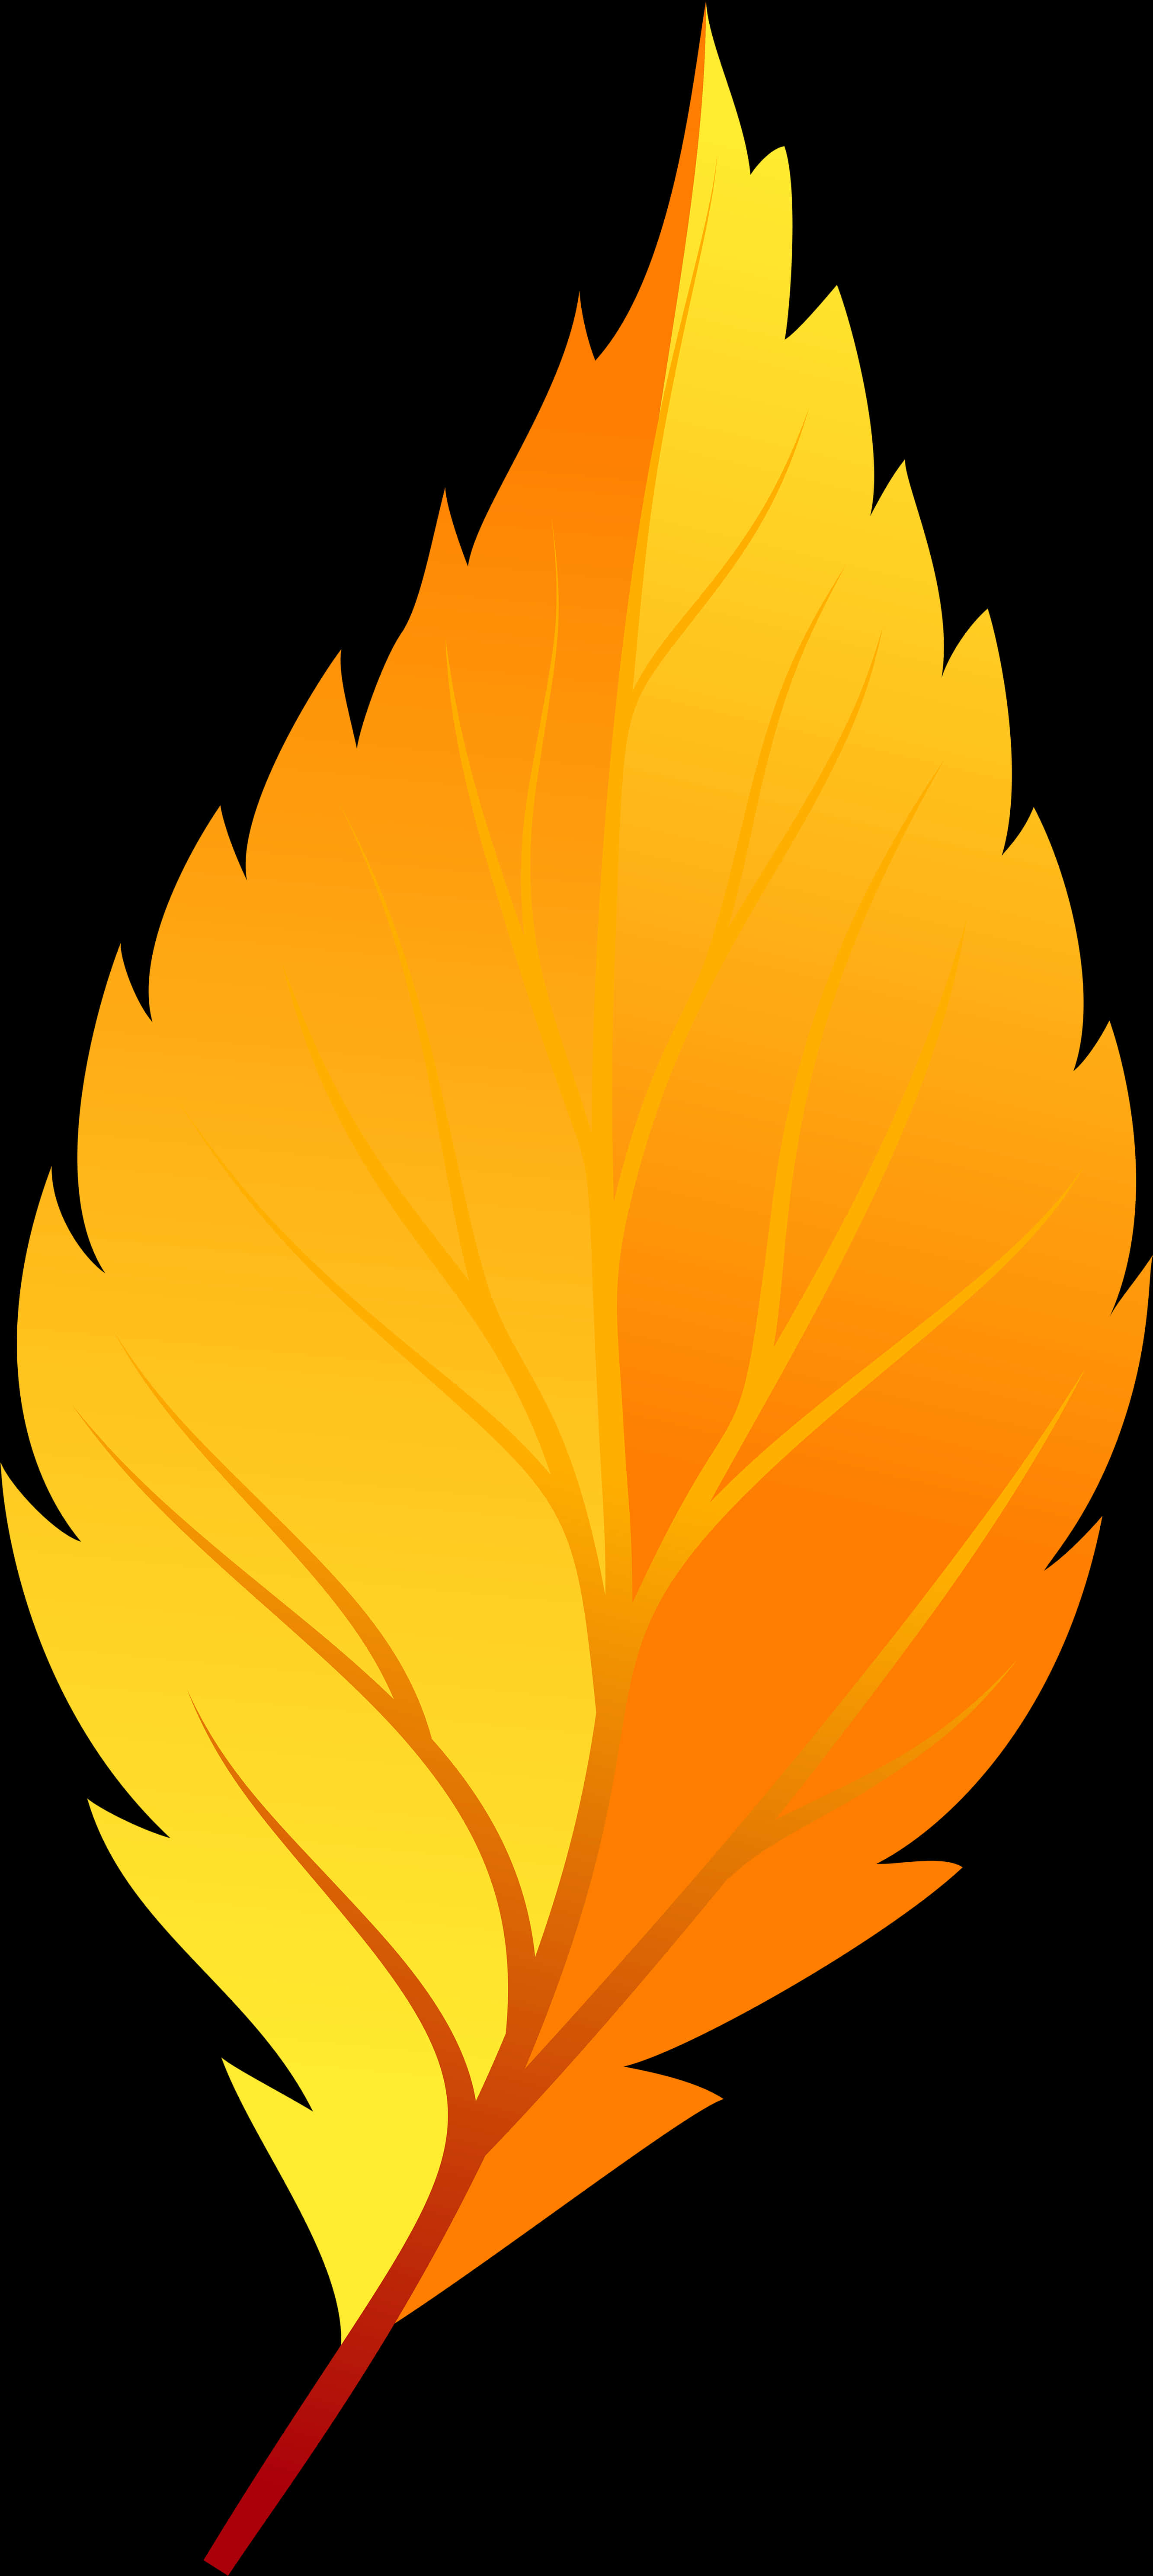 A Yellow Leaf With Black Background